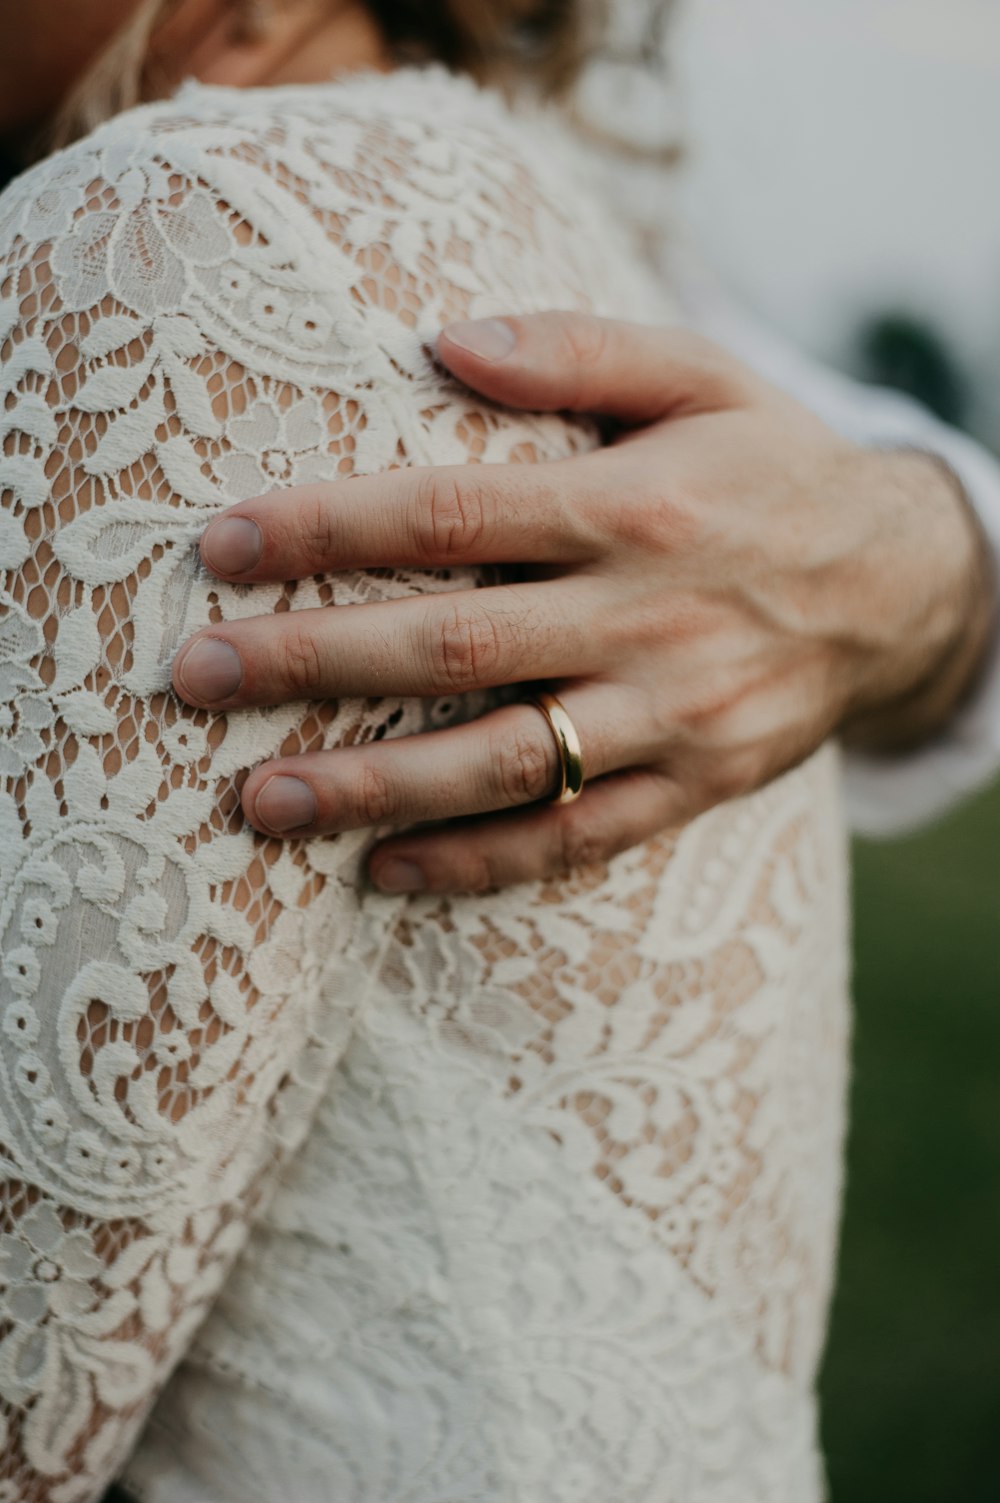 a close up of a person wearing a wedding ring